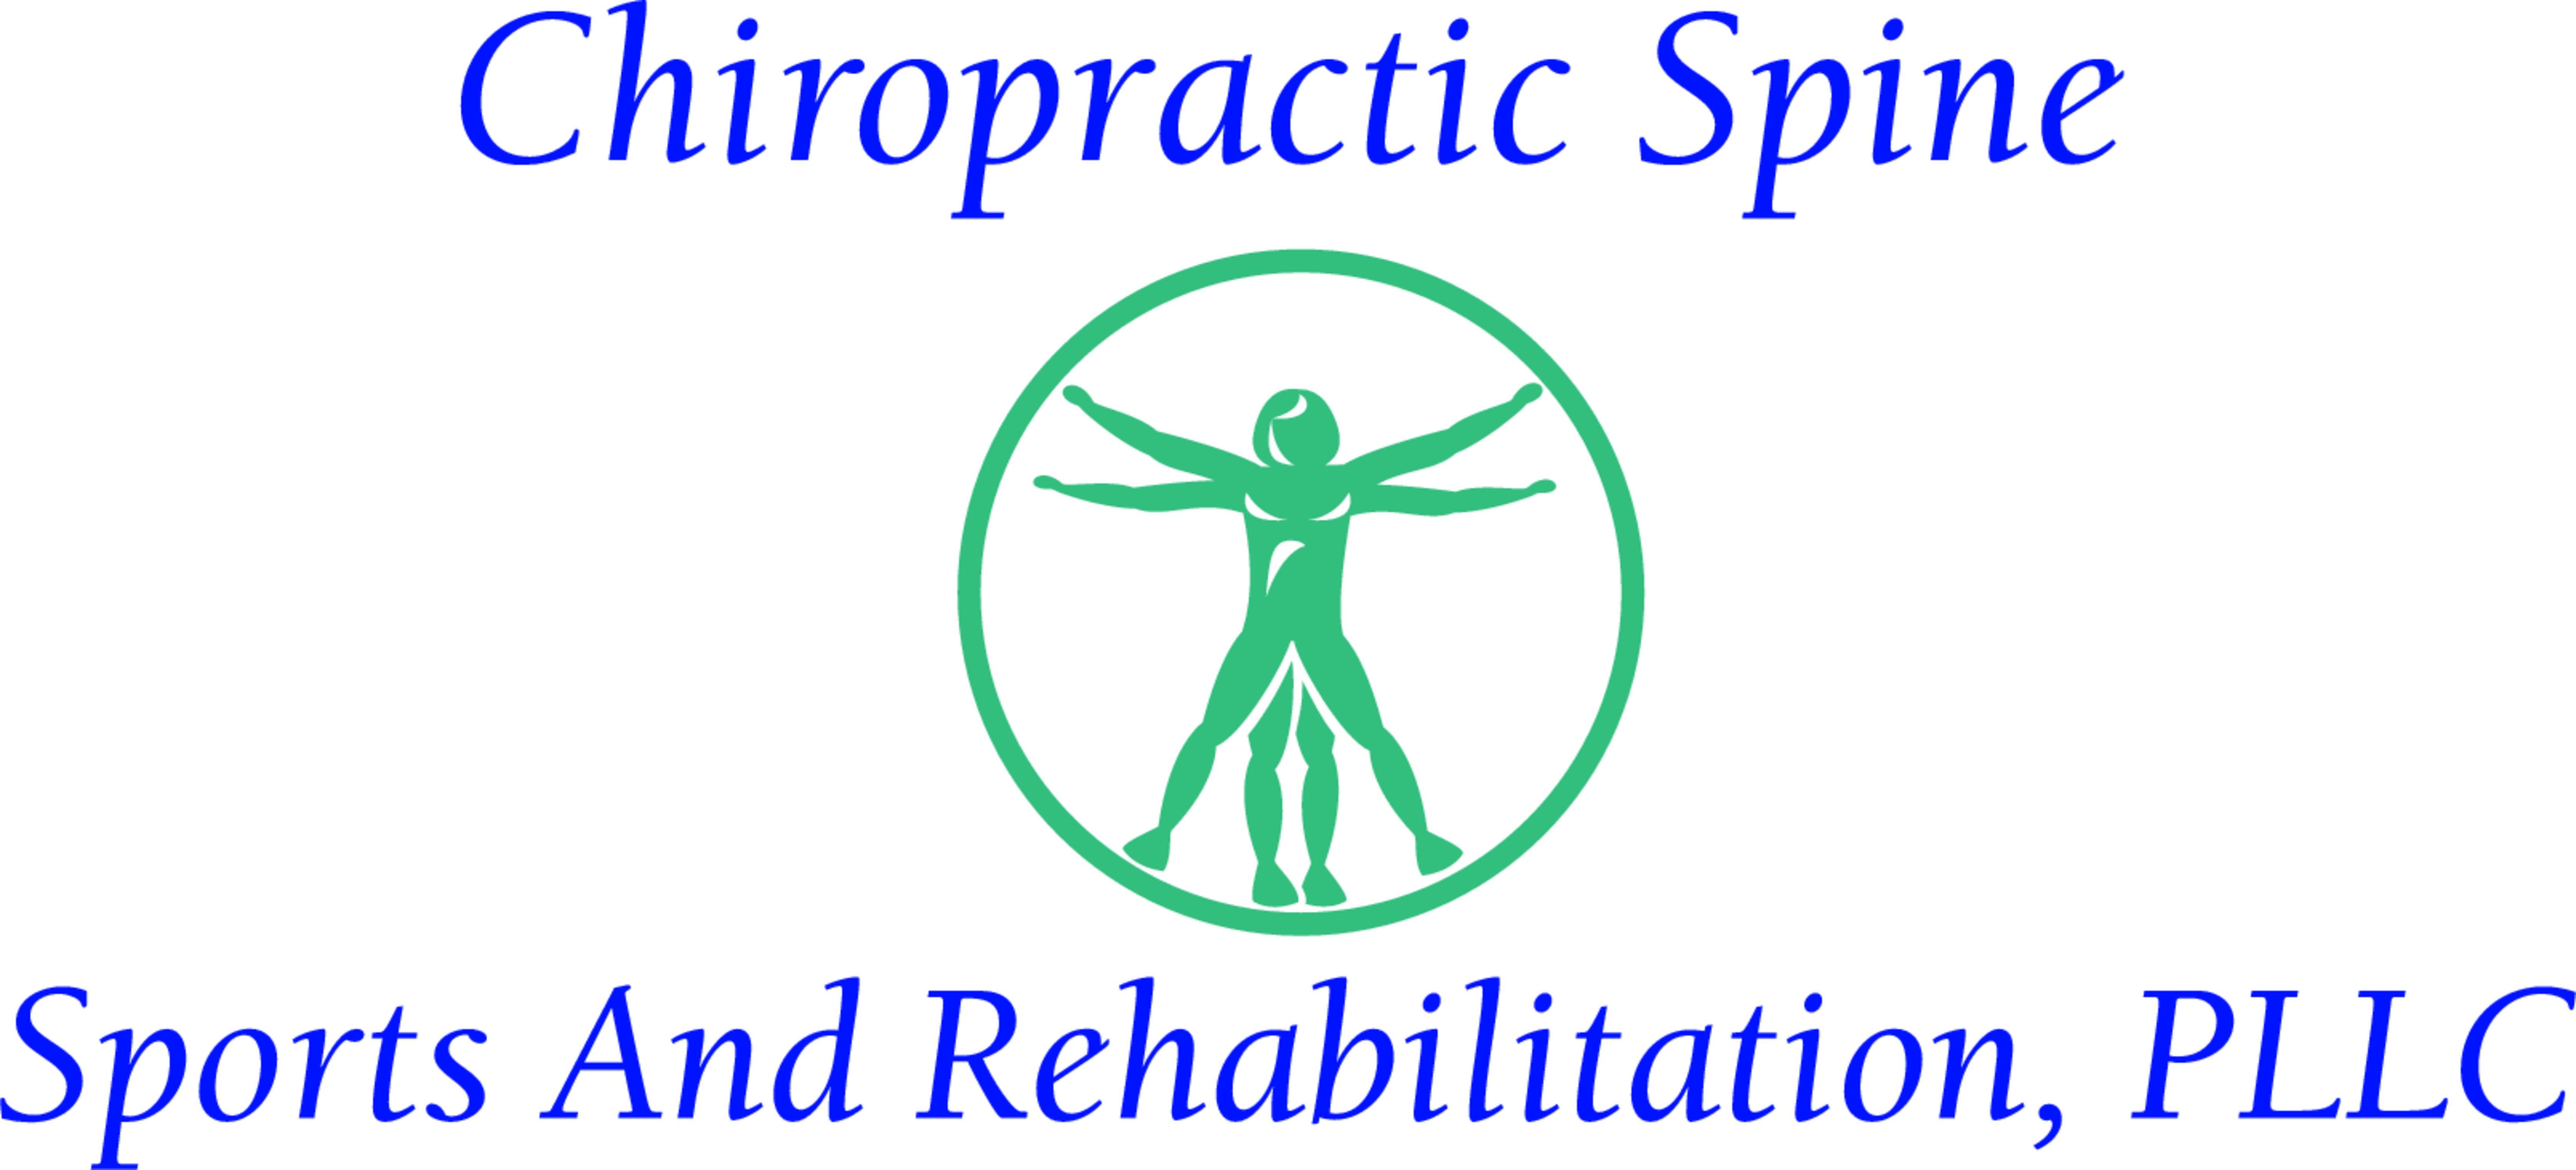 References for chiropractic Articles  Chiropractic Spine Sports And  Rehabilitation